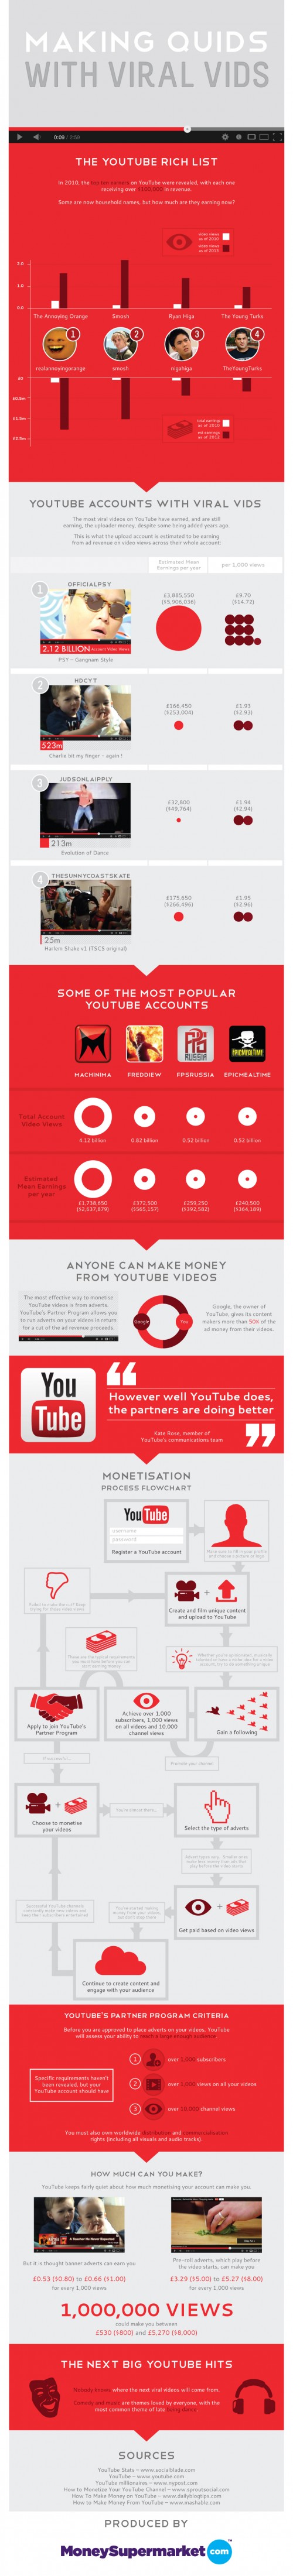 How To Make Money From Viral & YouTube Videos? (Infographic)